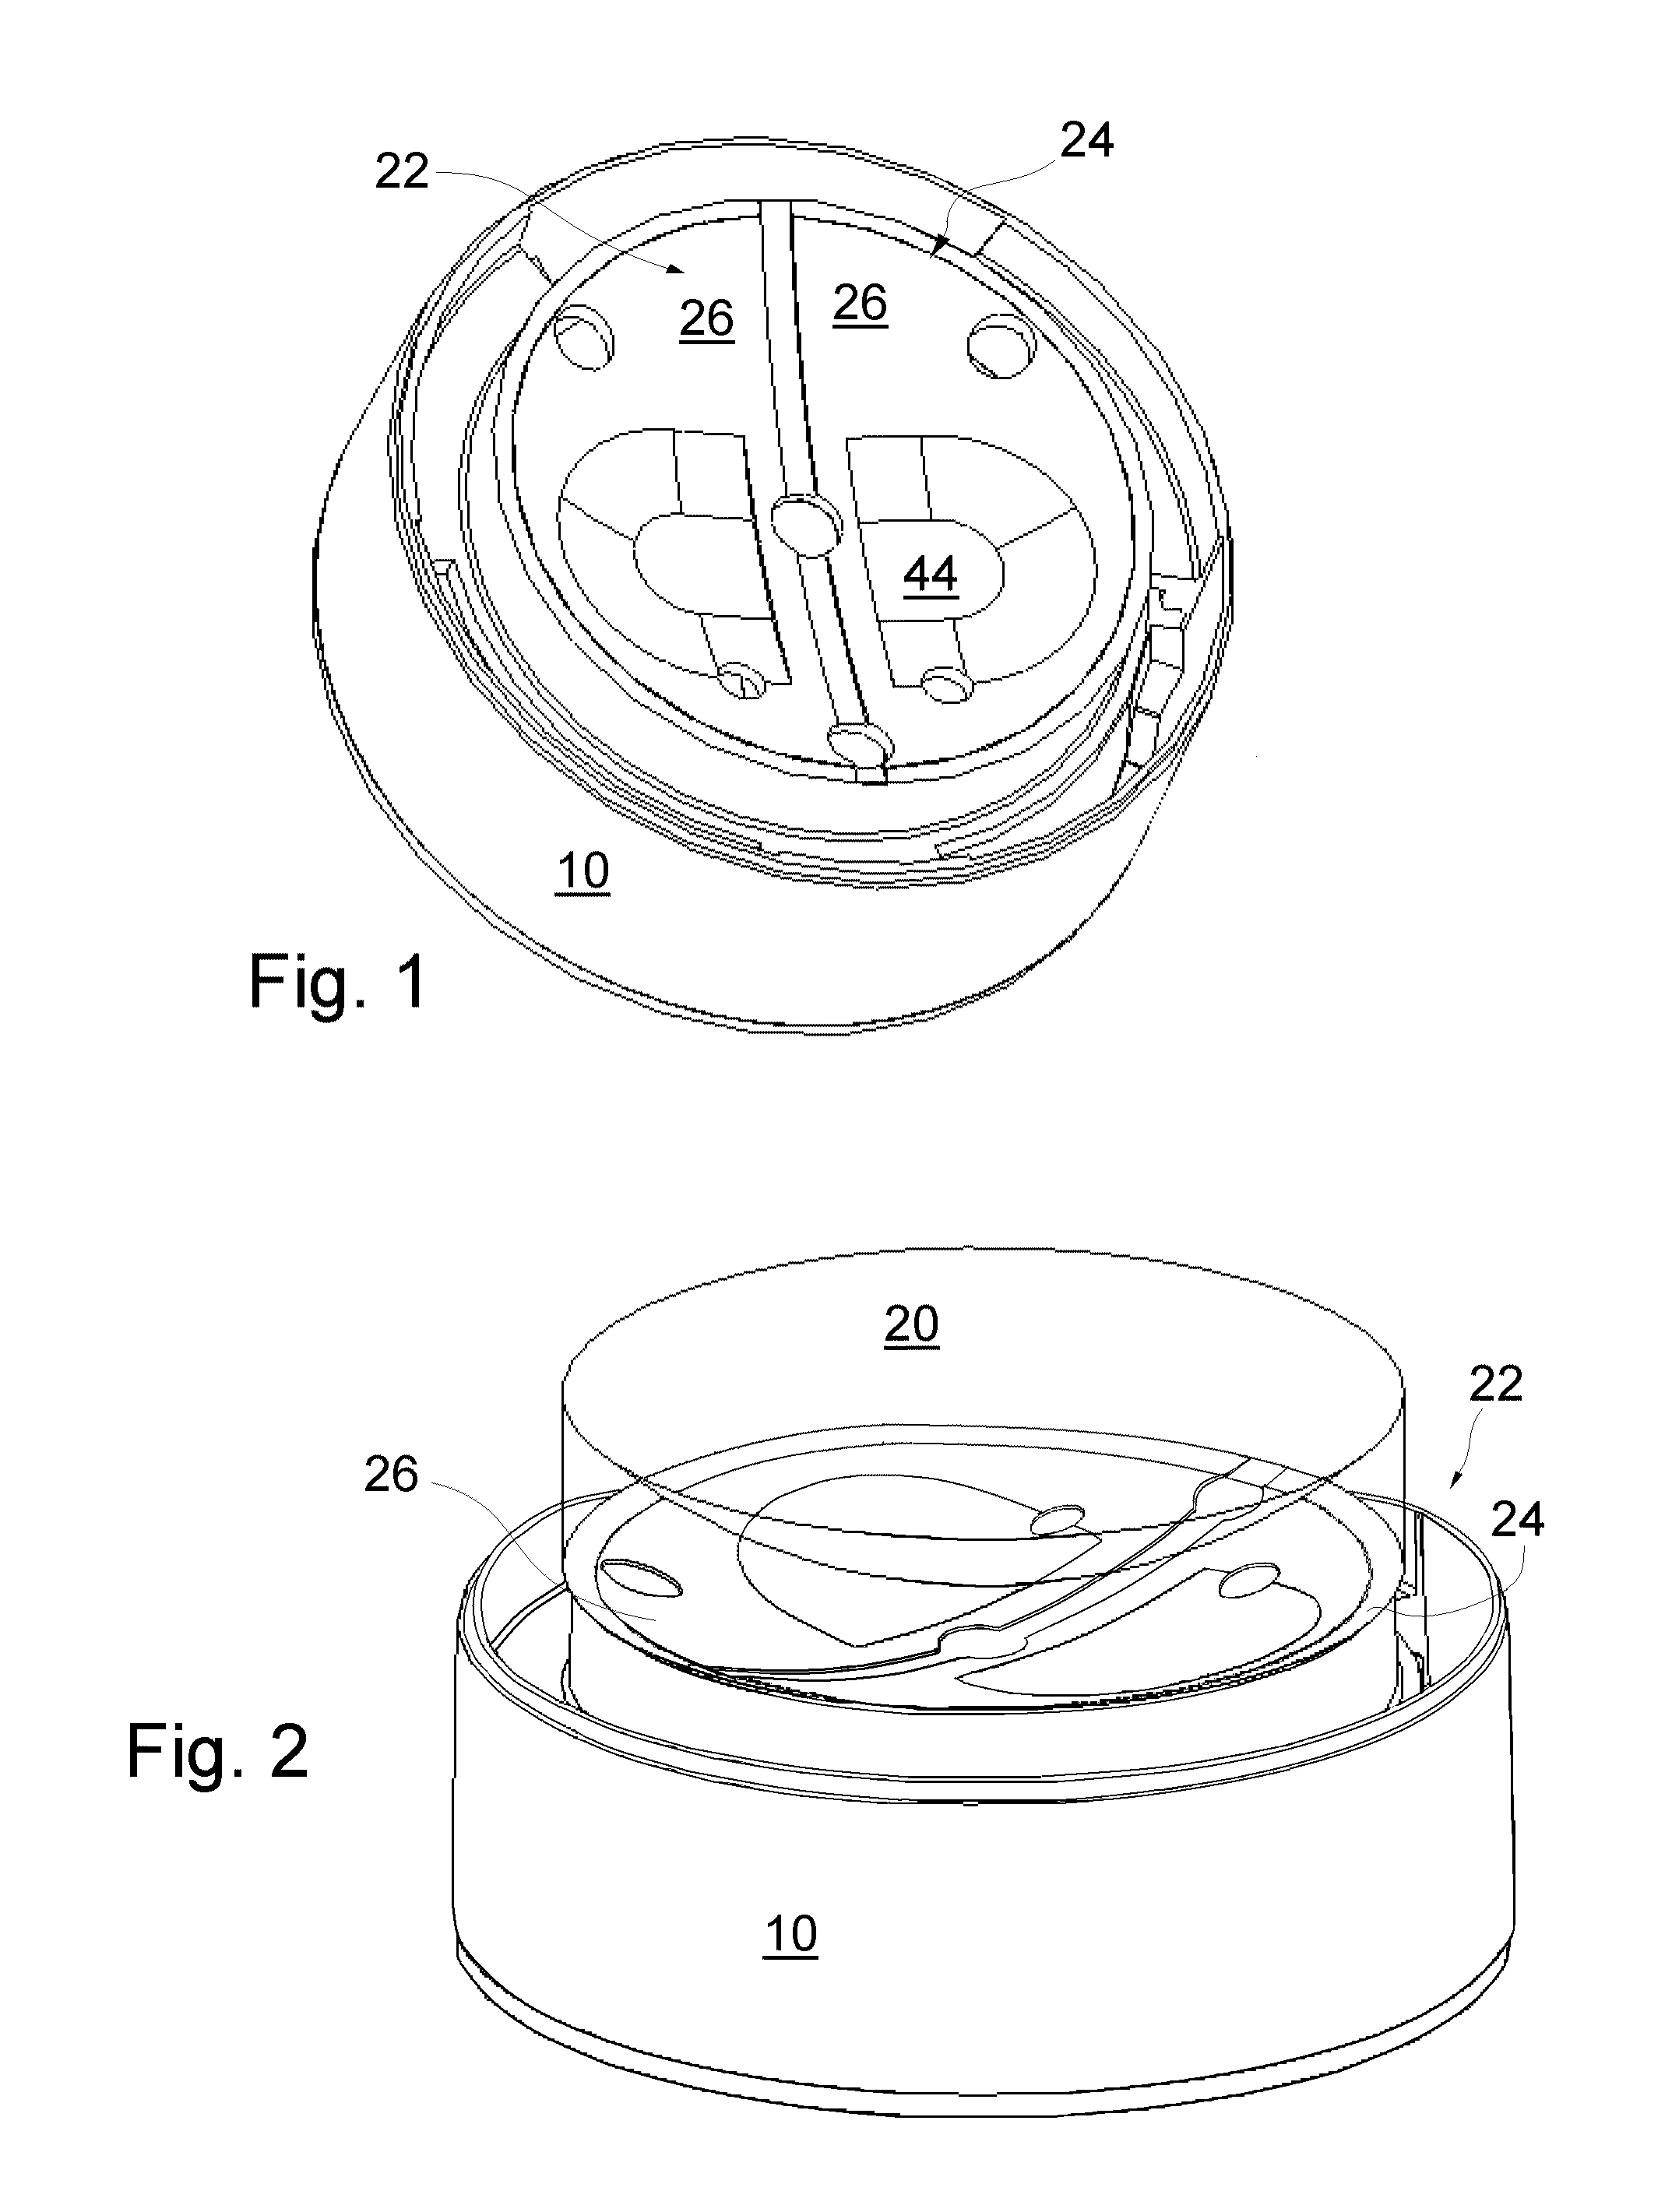 System and method pre-blocking ophthalmic lens for processing including articulation edging